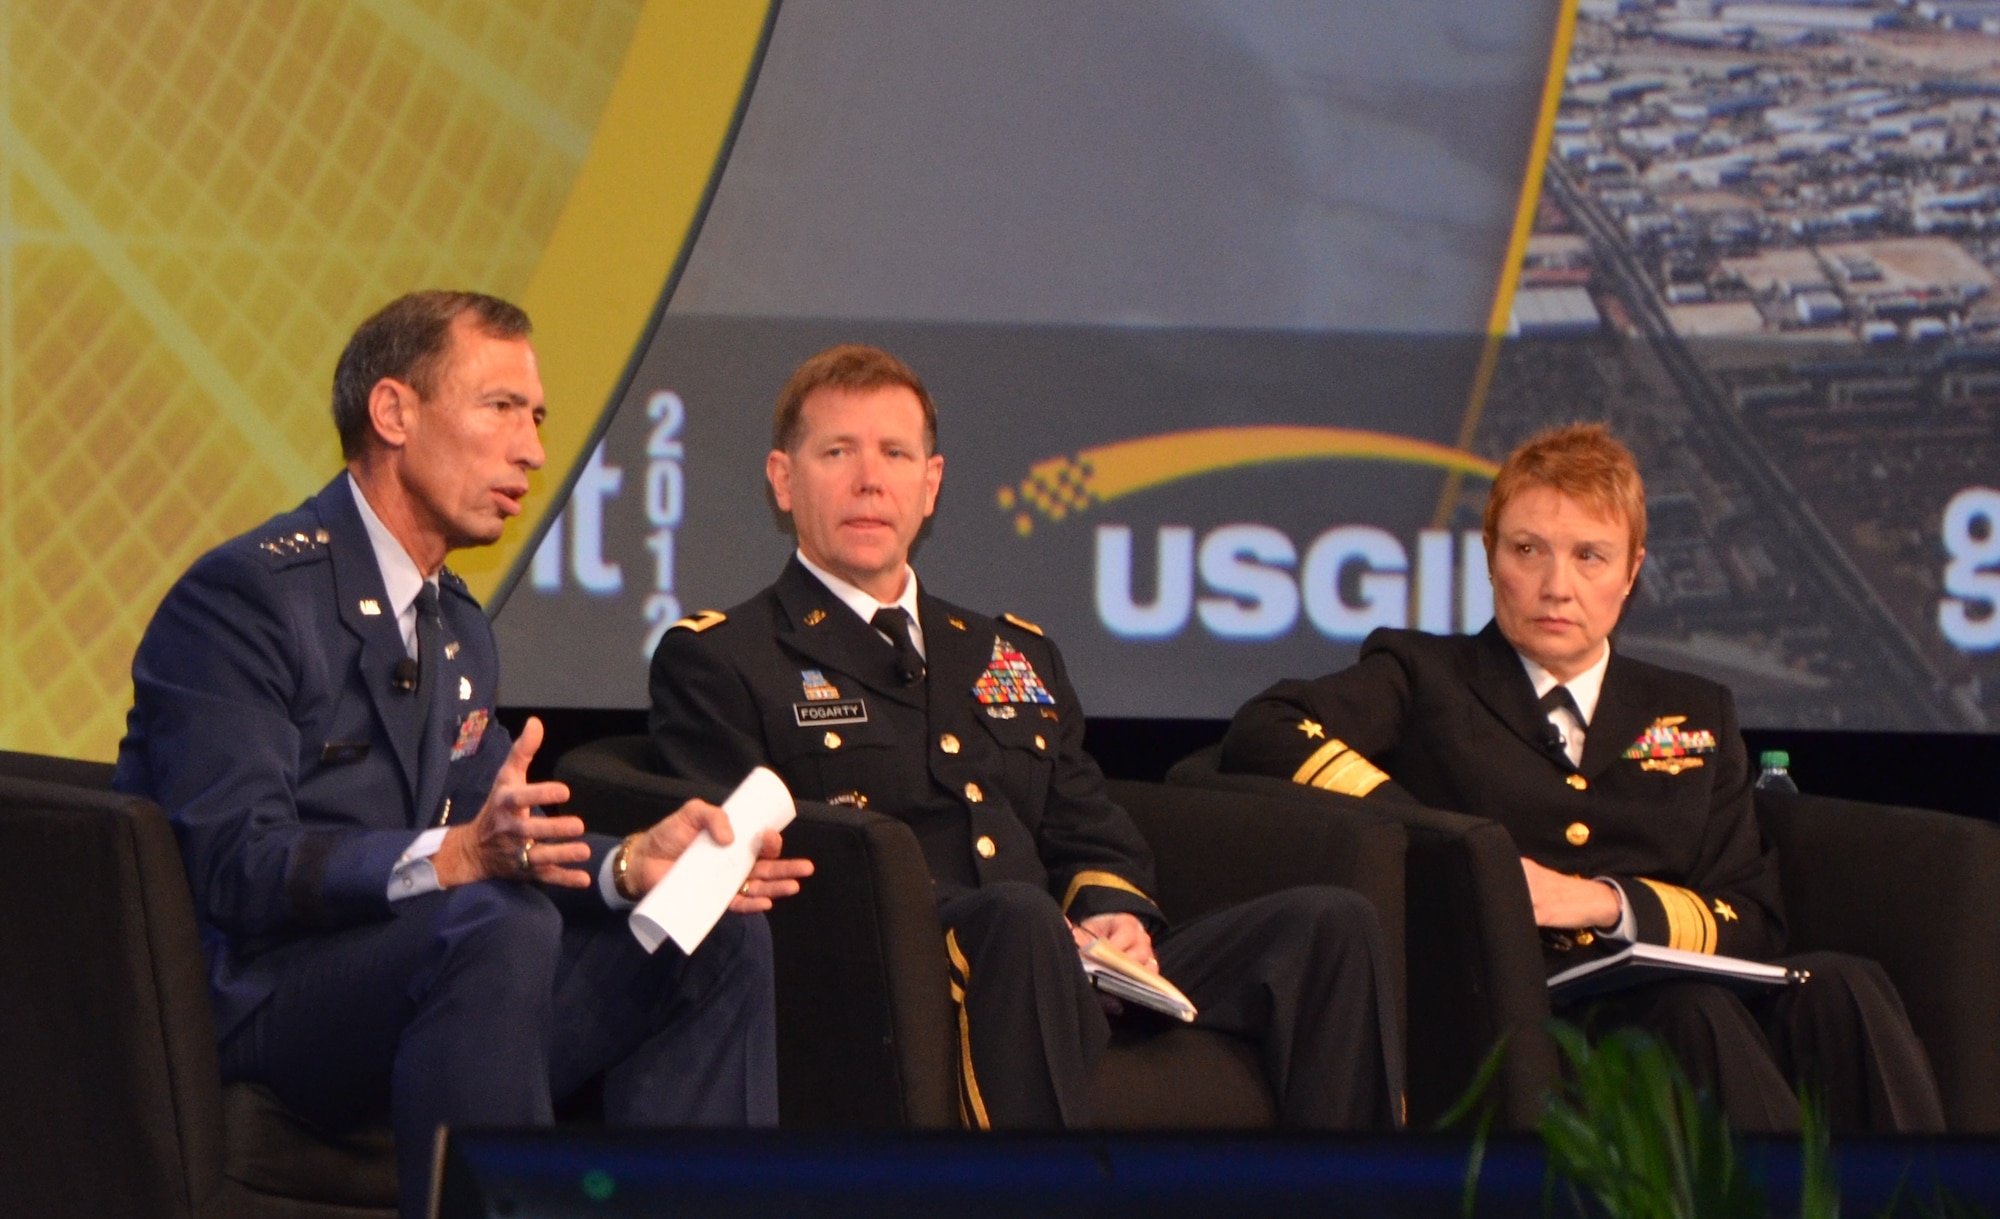 ORLANDO, Fla. -- Lt. Gen. Larry James (left) addresses attendees at the 2012 GEOINT Symposium, Oct. 11 here. James, the Air Force deputy chief of Intelligence, Surveillance and Reconnaissance, was joined by Maj. Gen. Steve Fogarty (center), commanding general of U.S. Army Intelligence and Security Command; Rear Adm. Sandy Daniels (right), Senior Advisor for Space to the Deputy Chief of Naval Operations for Information Dominance and Phillip C. Chuboda (not pictured), assistant director of intelligence for the U.S. Marine Corps. (U.S. Air Force photo by Susan A. Romano)
